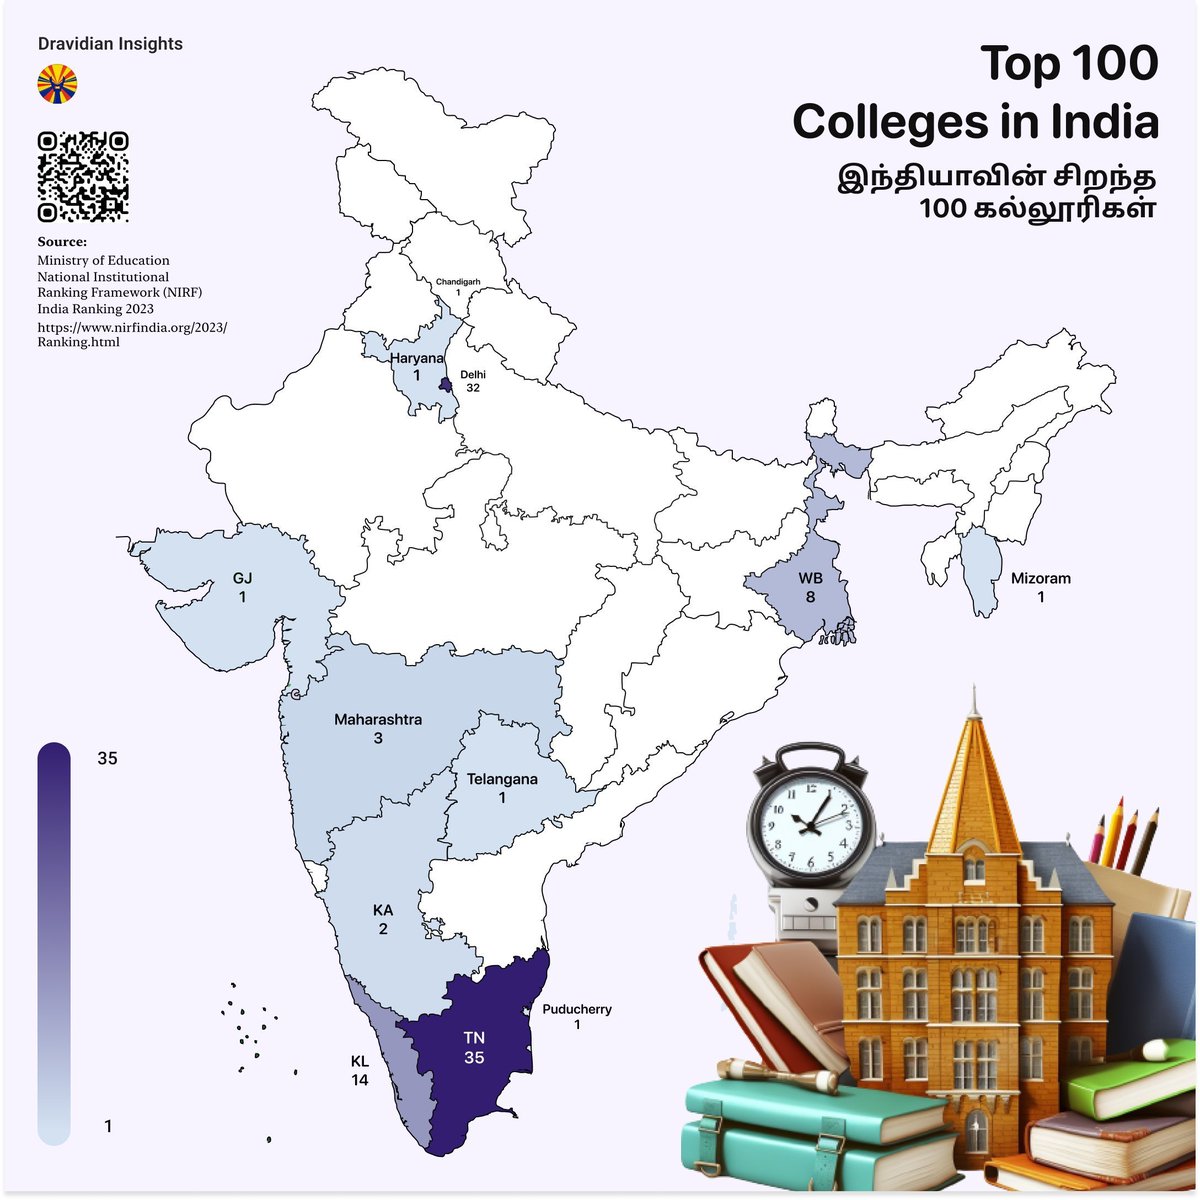 Out of the top 100 colleges ranked by the Ministry of Education of the Government of India for providing quality education, 35 colleges are from Tamil Nadu, 32 are from Delhi, 14 are from Kerala and the remaining 19 are from the rest of India.

(Source: NIRF rankings - 2023)